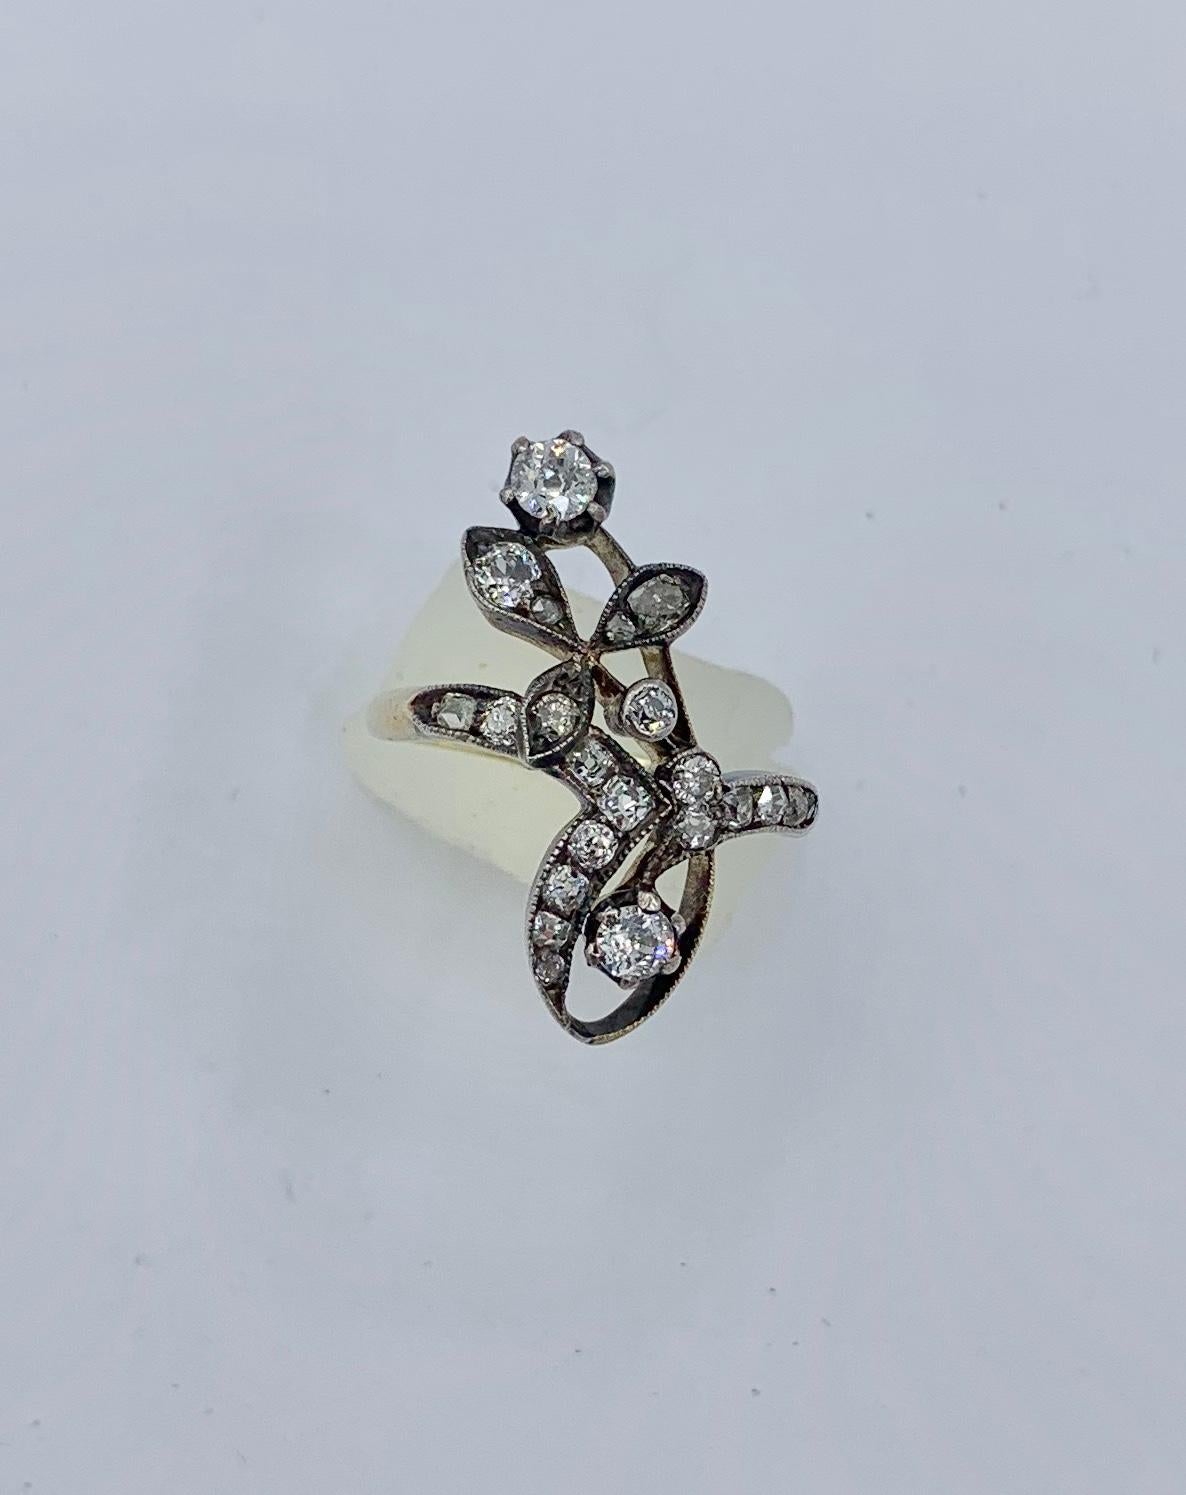 This is an extraordinary Russian Art Nouveau, Belle Epoque Old Mine Cut Diamond Ring in a stunning and very rare Flower motif of great beauty.   The Old Mine Cut Diamonds are set in Silver atop 14 Karat Gold as was the custom of the period in order